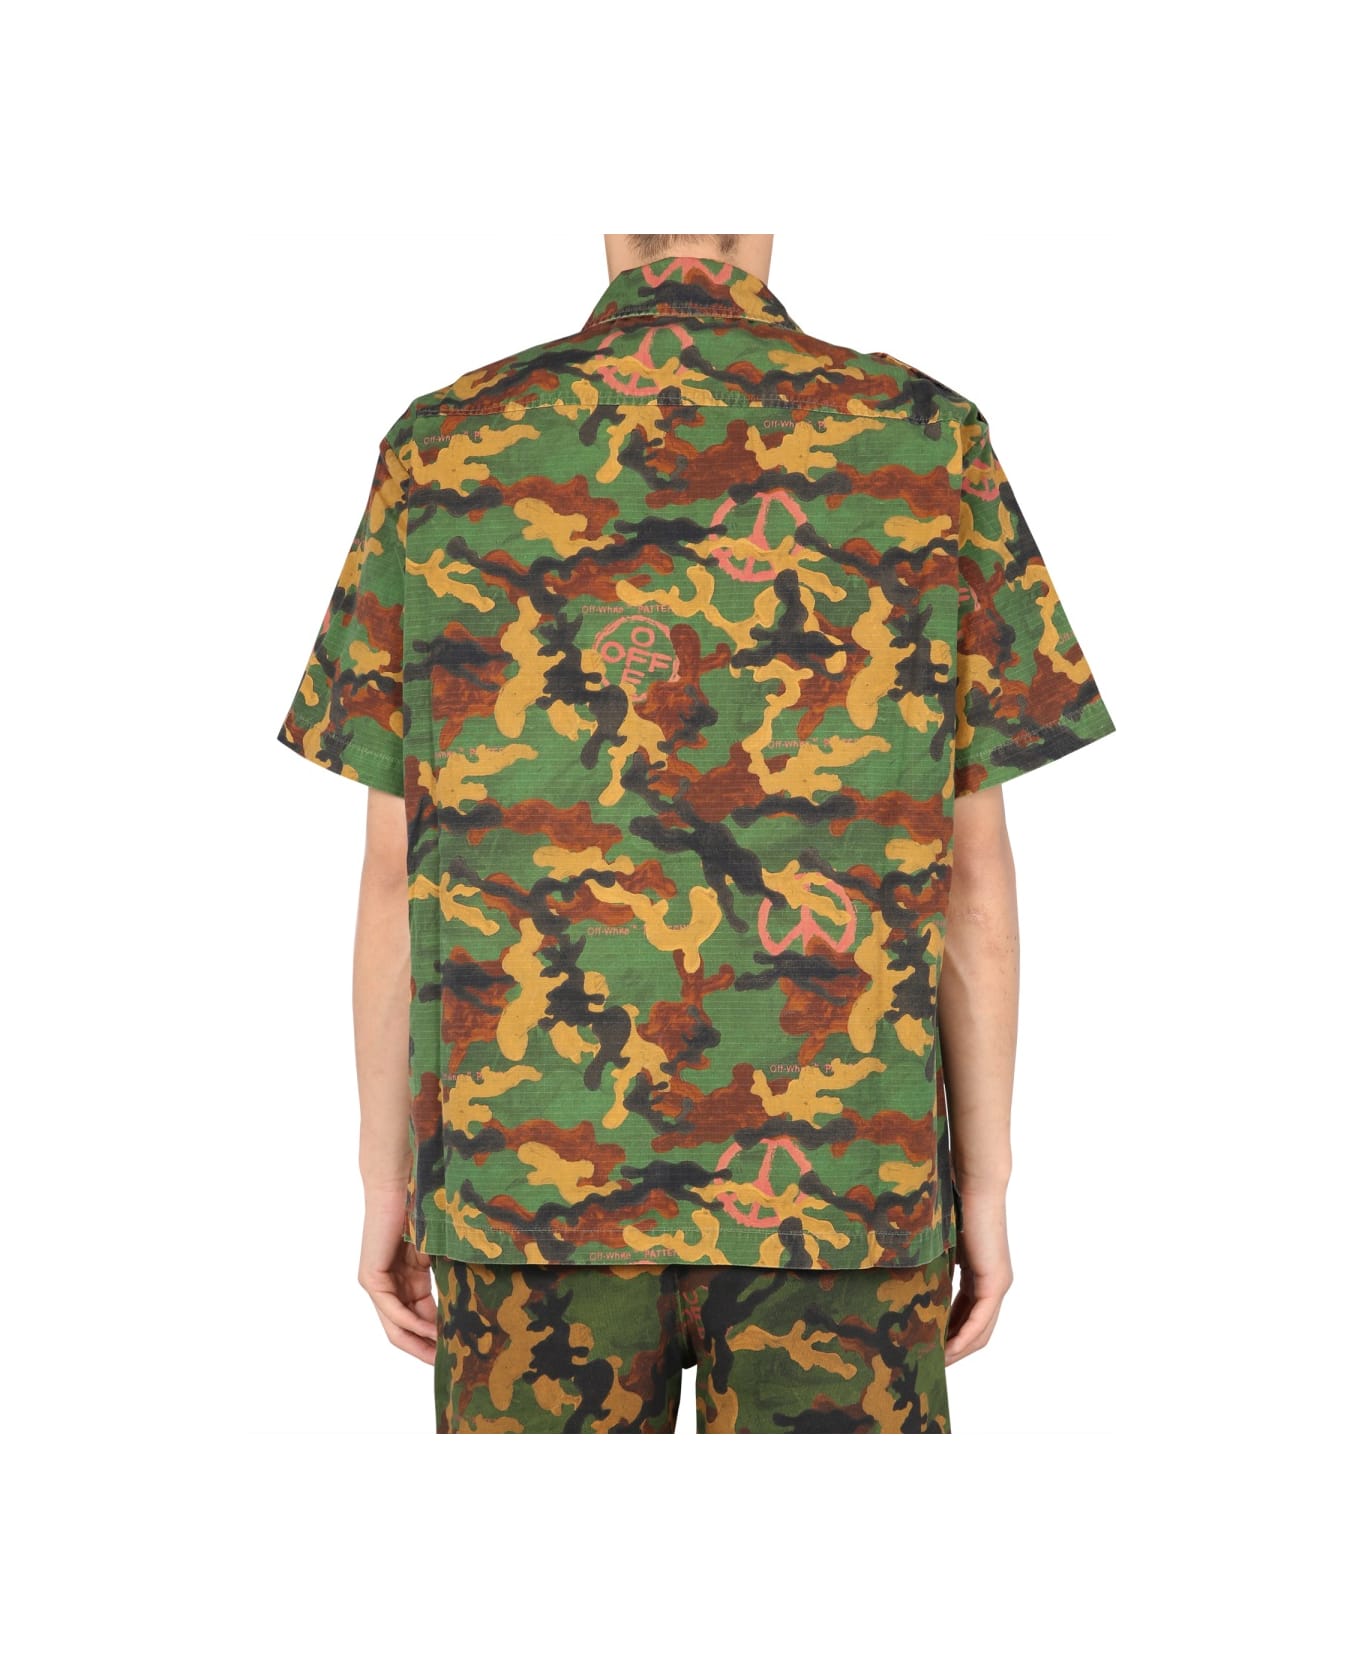 Off-White Camouflage Shirt - MILITARY GREEN